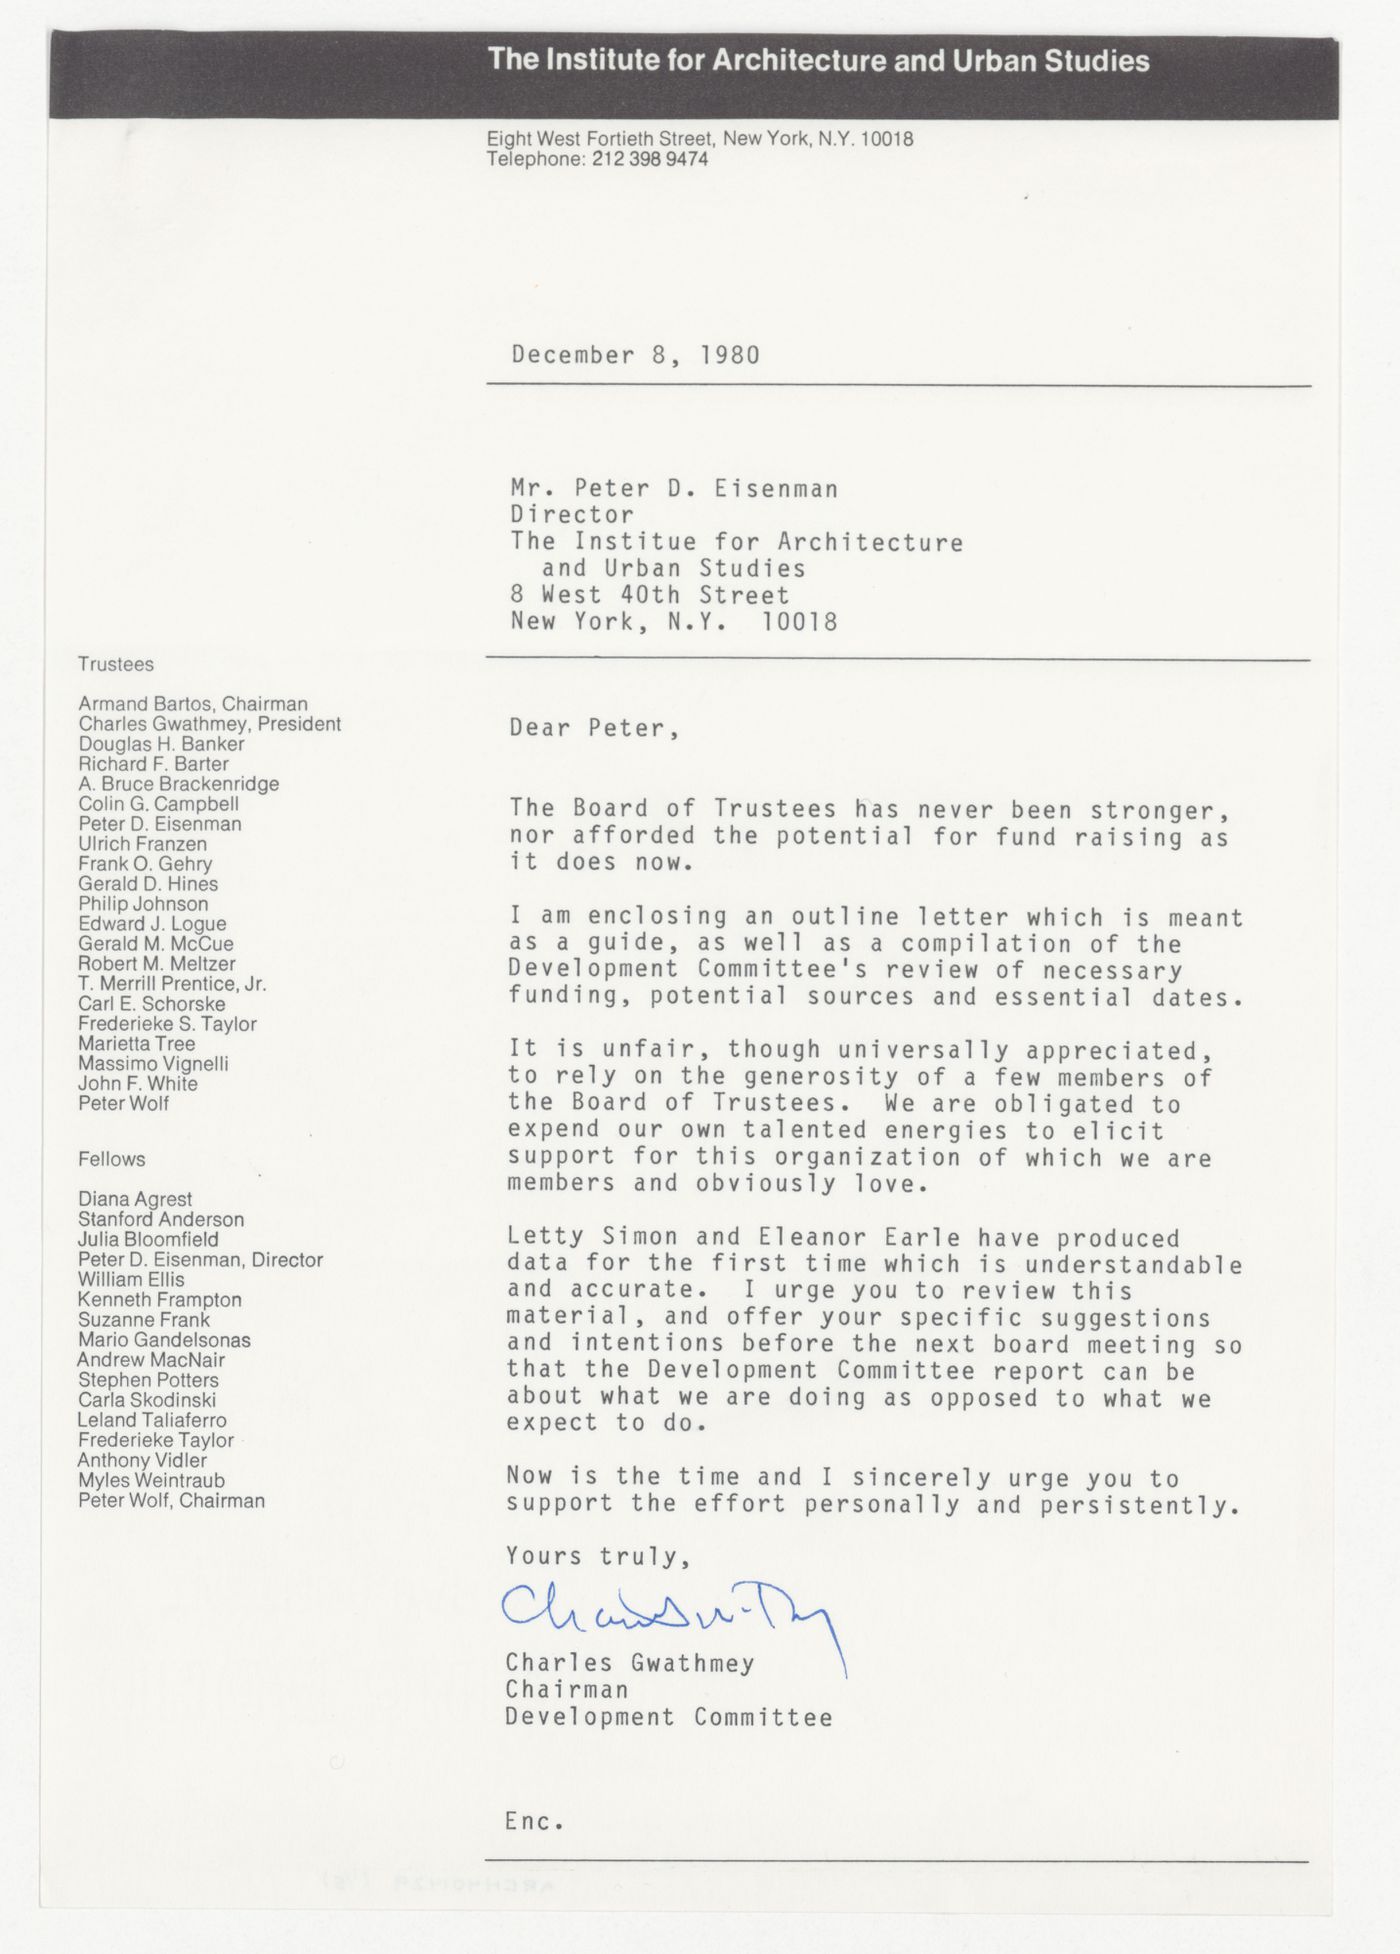 Letter from Charles Gwathmey to Peter D. Eisenman with attached development plan for financial year 1980-1981